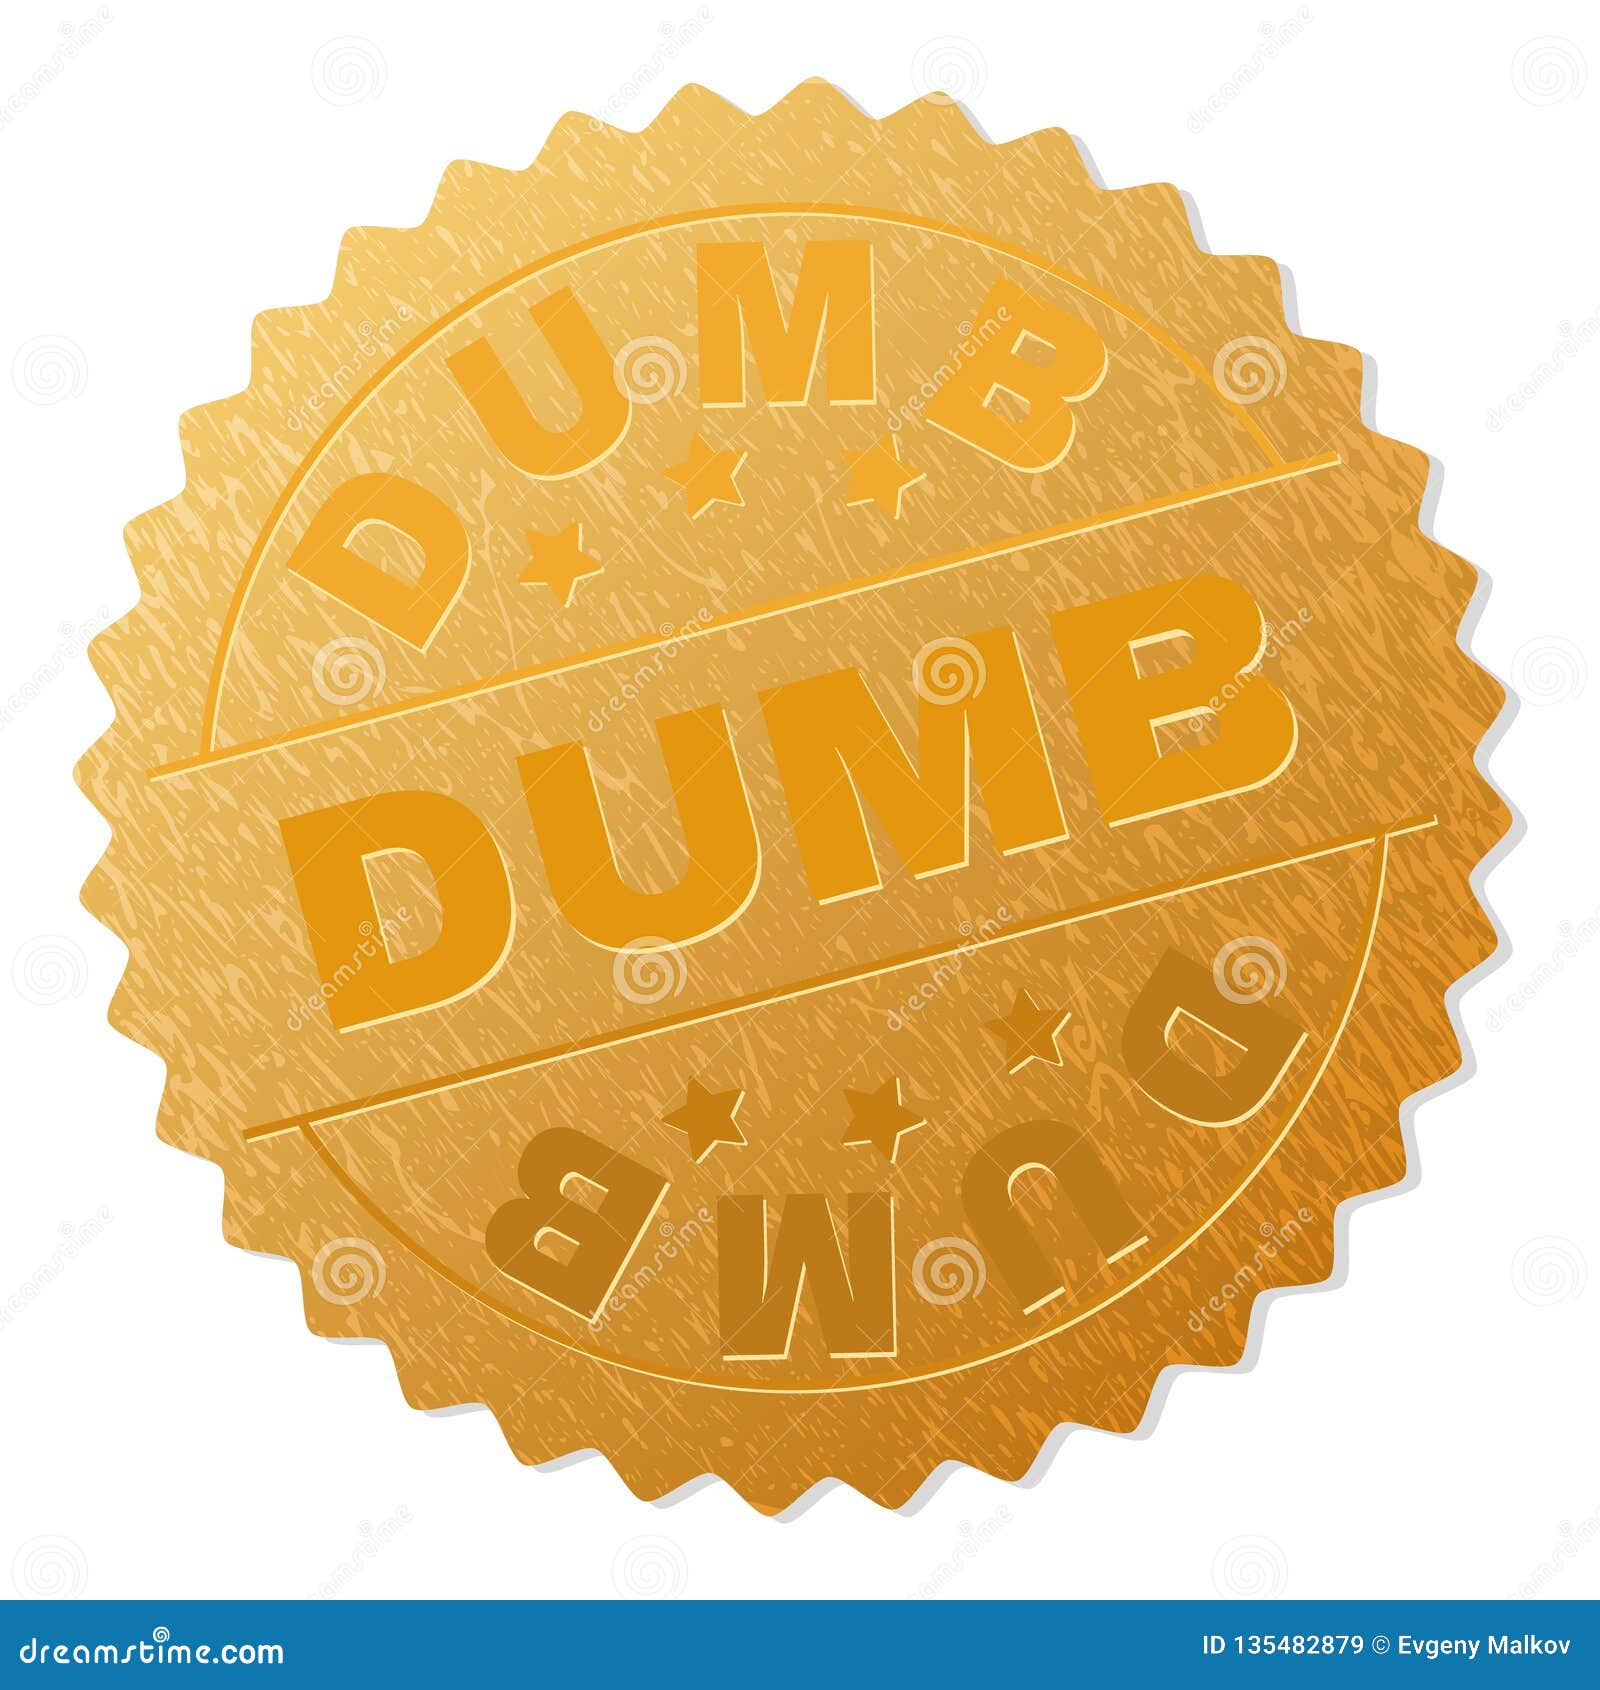 Biggest Idiot, Gold Aahs Engraving Worlds Greatest Plaques 